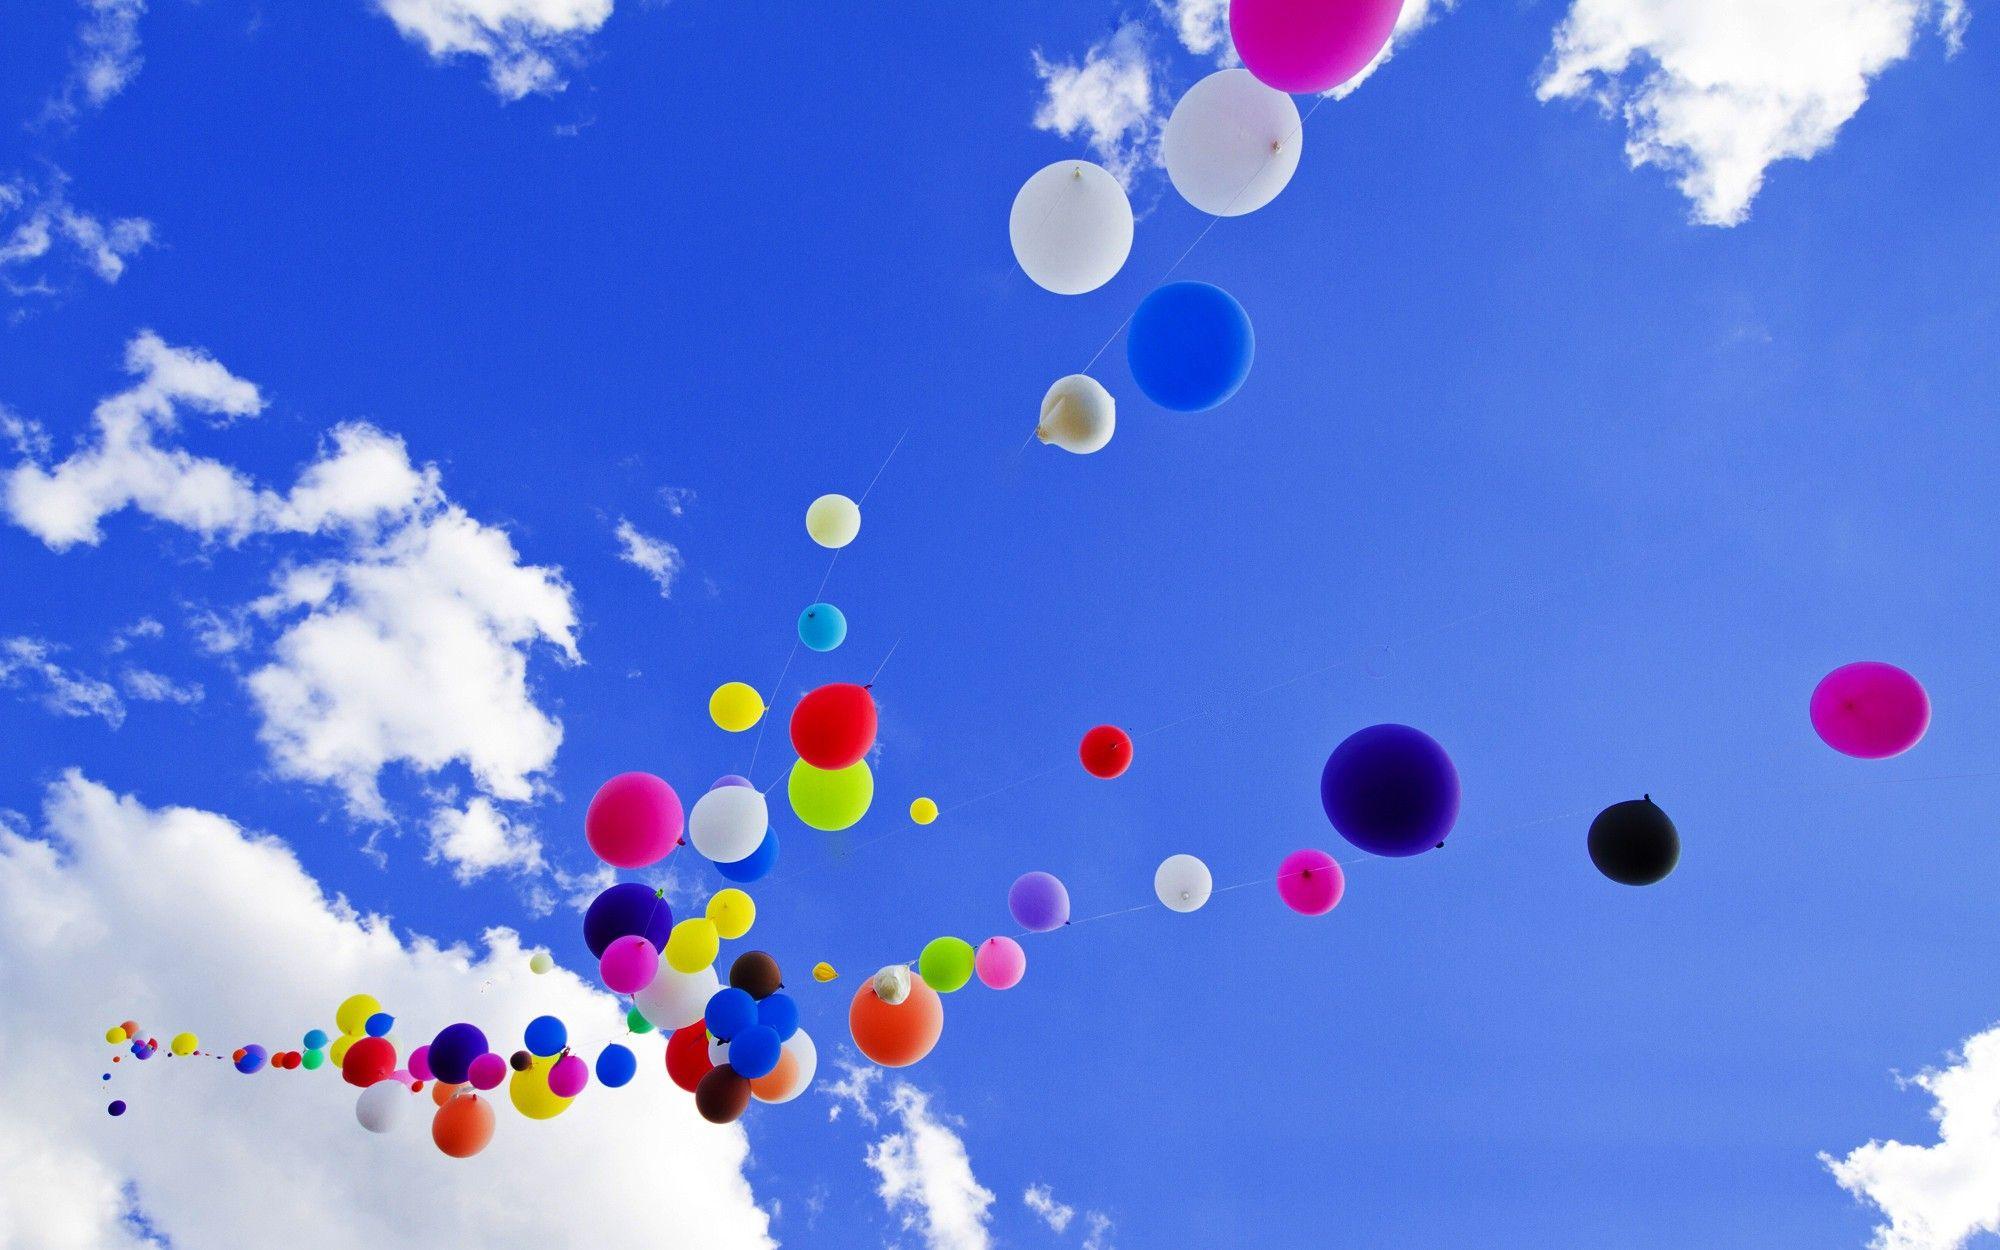 Colorful Balloons Wallpaper, 45 Free Modern Colorful Balloons